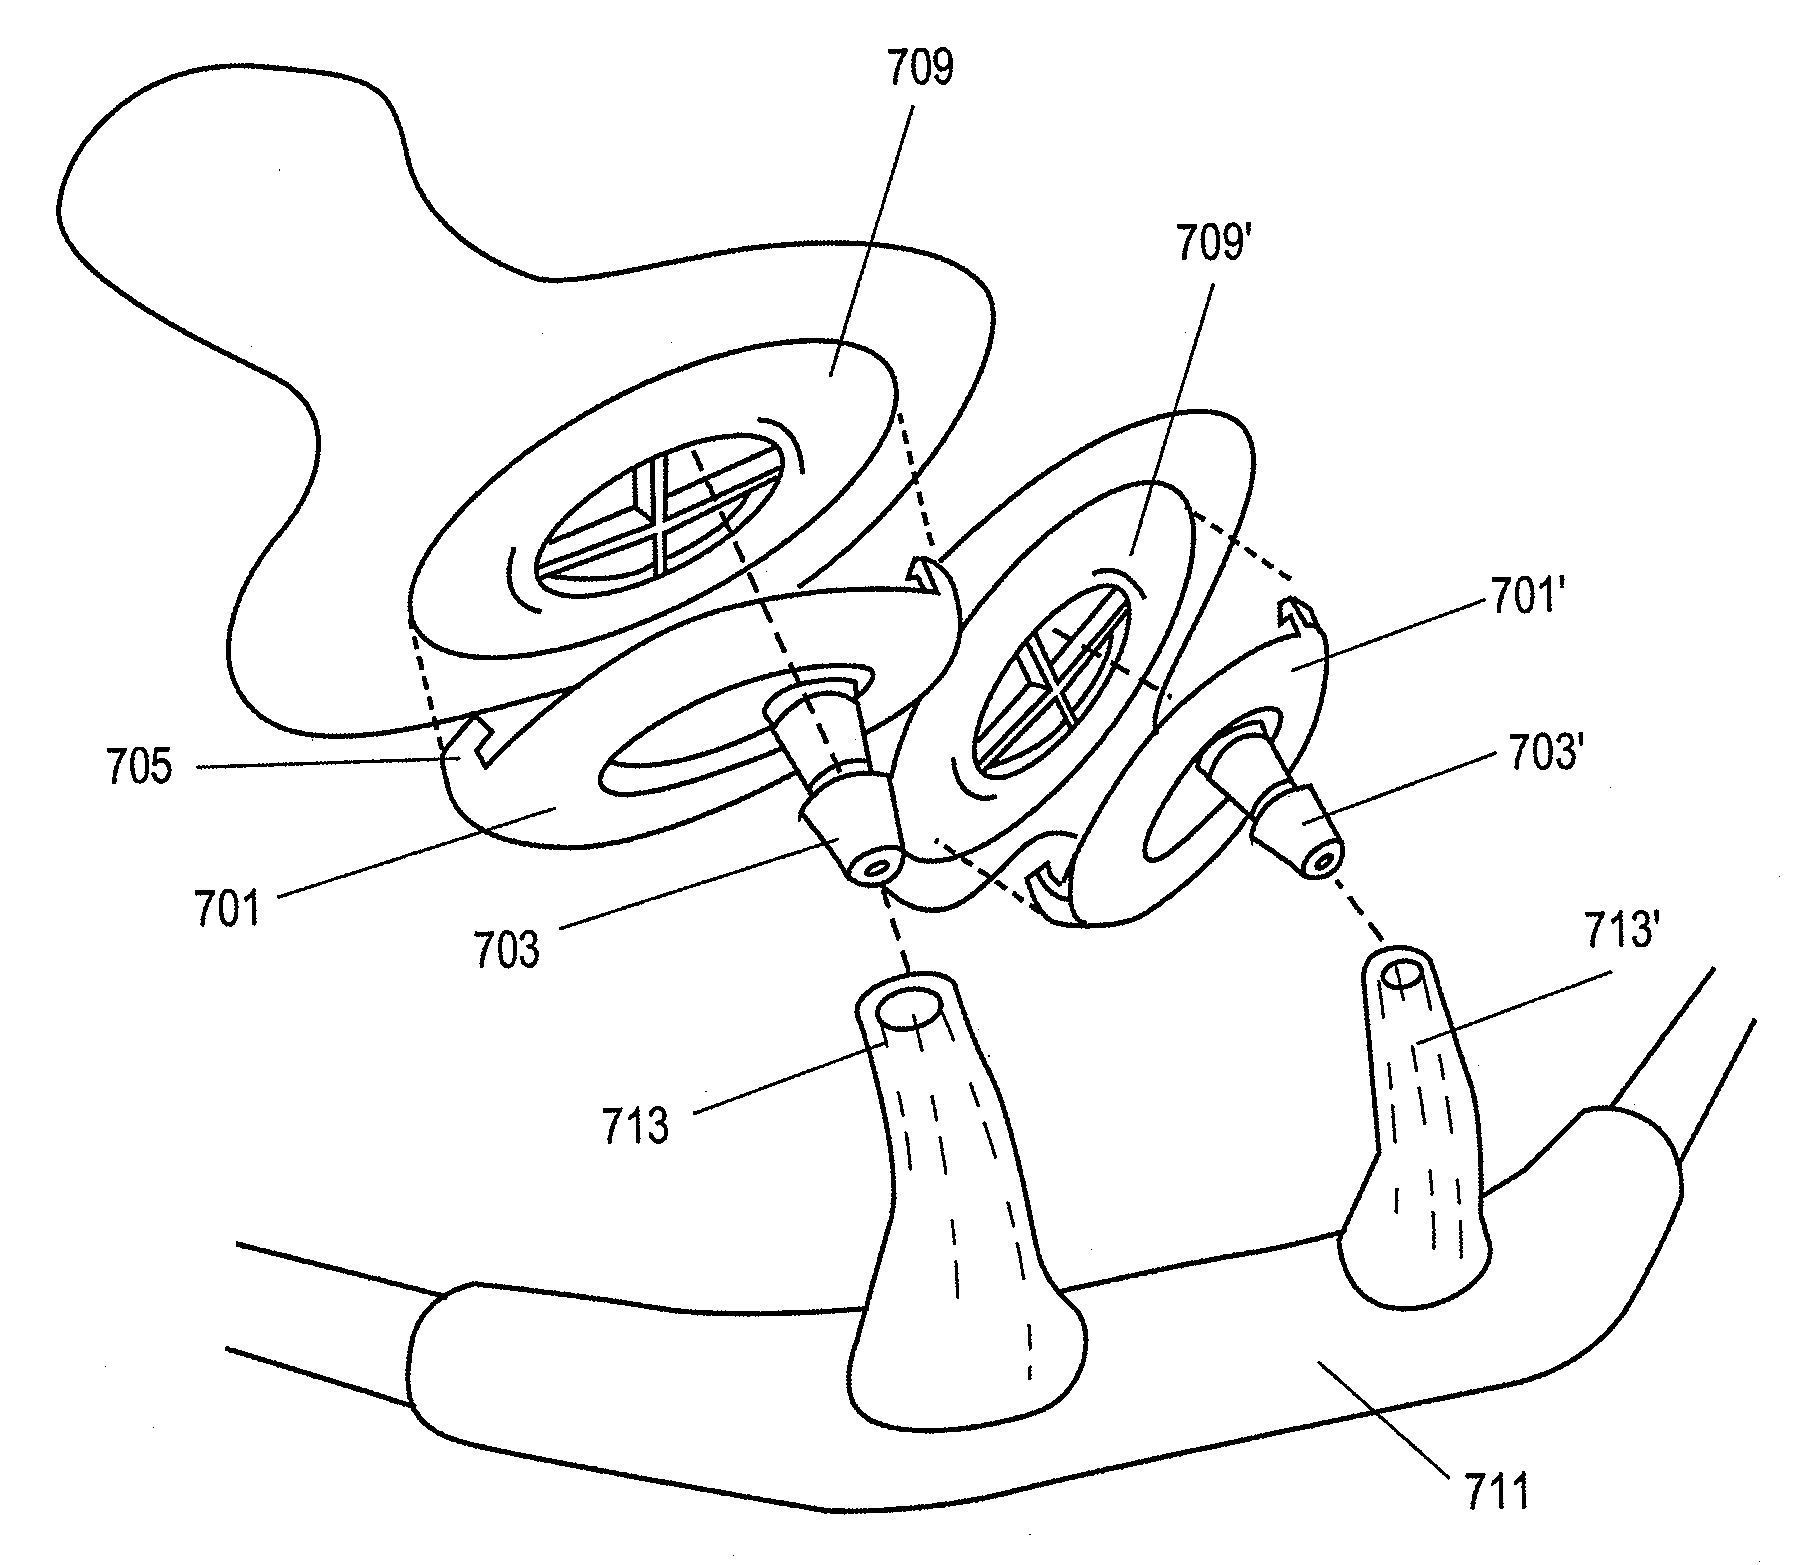 Respiratory sensor adapters for nasal devices